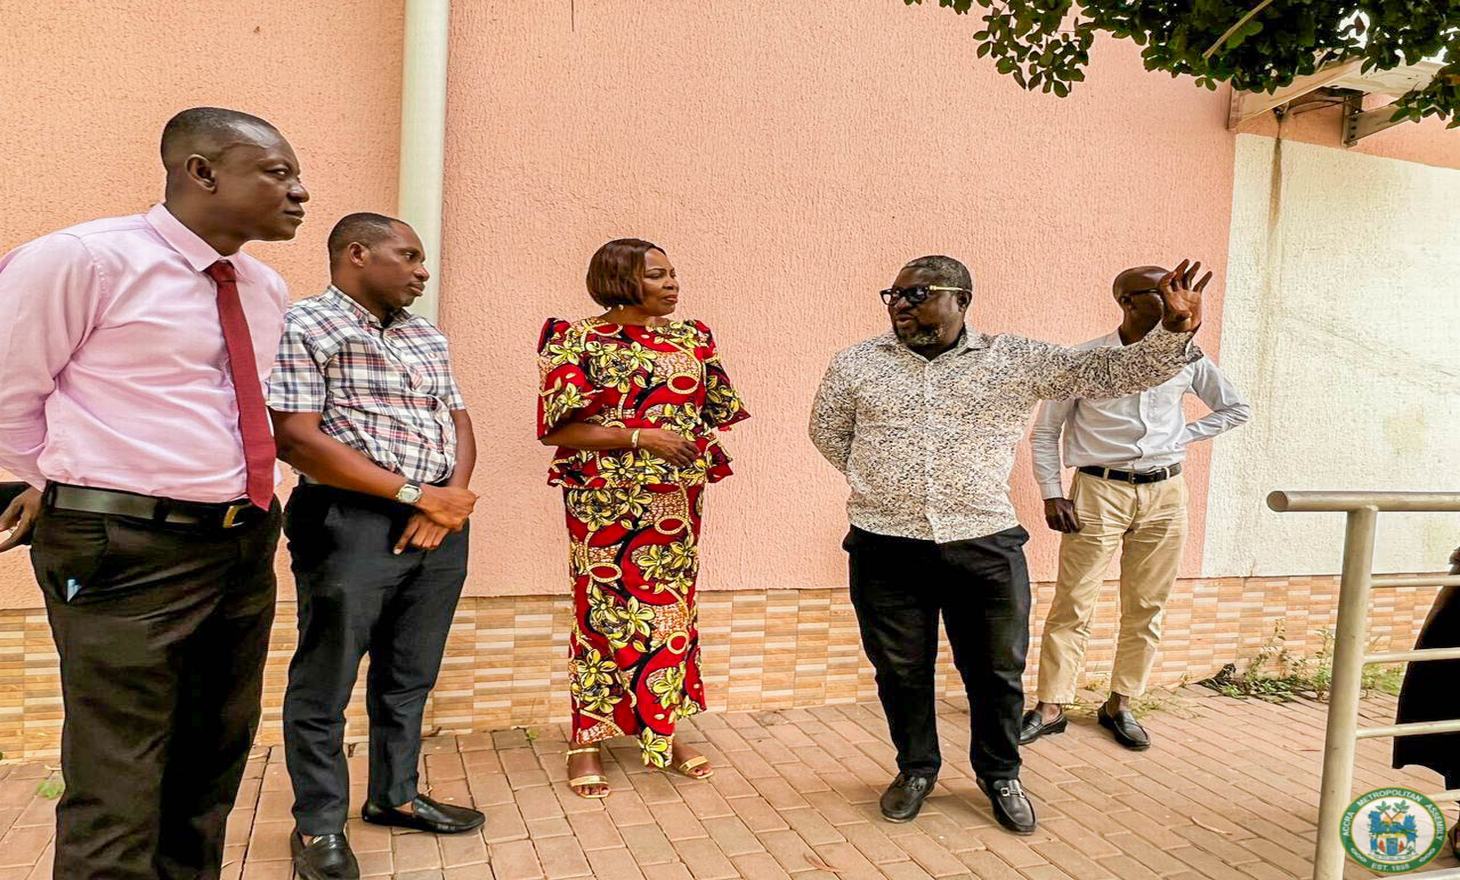 AMA to construct walkway facilities for visually impaired patients visiting Korle-Bu